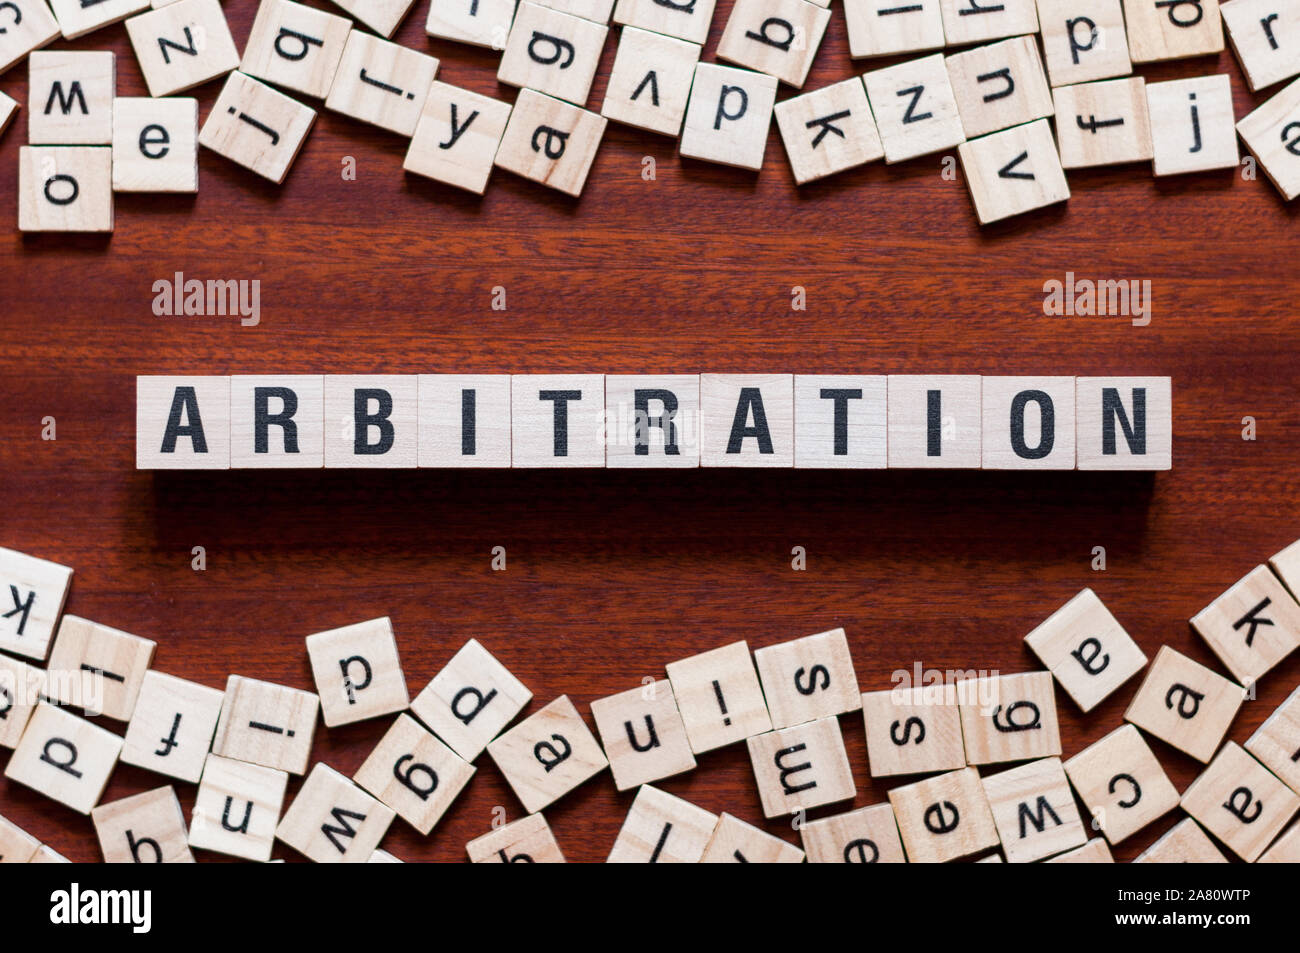 Arbitration word concept on cubes for articles Stock Photo